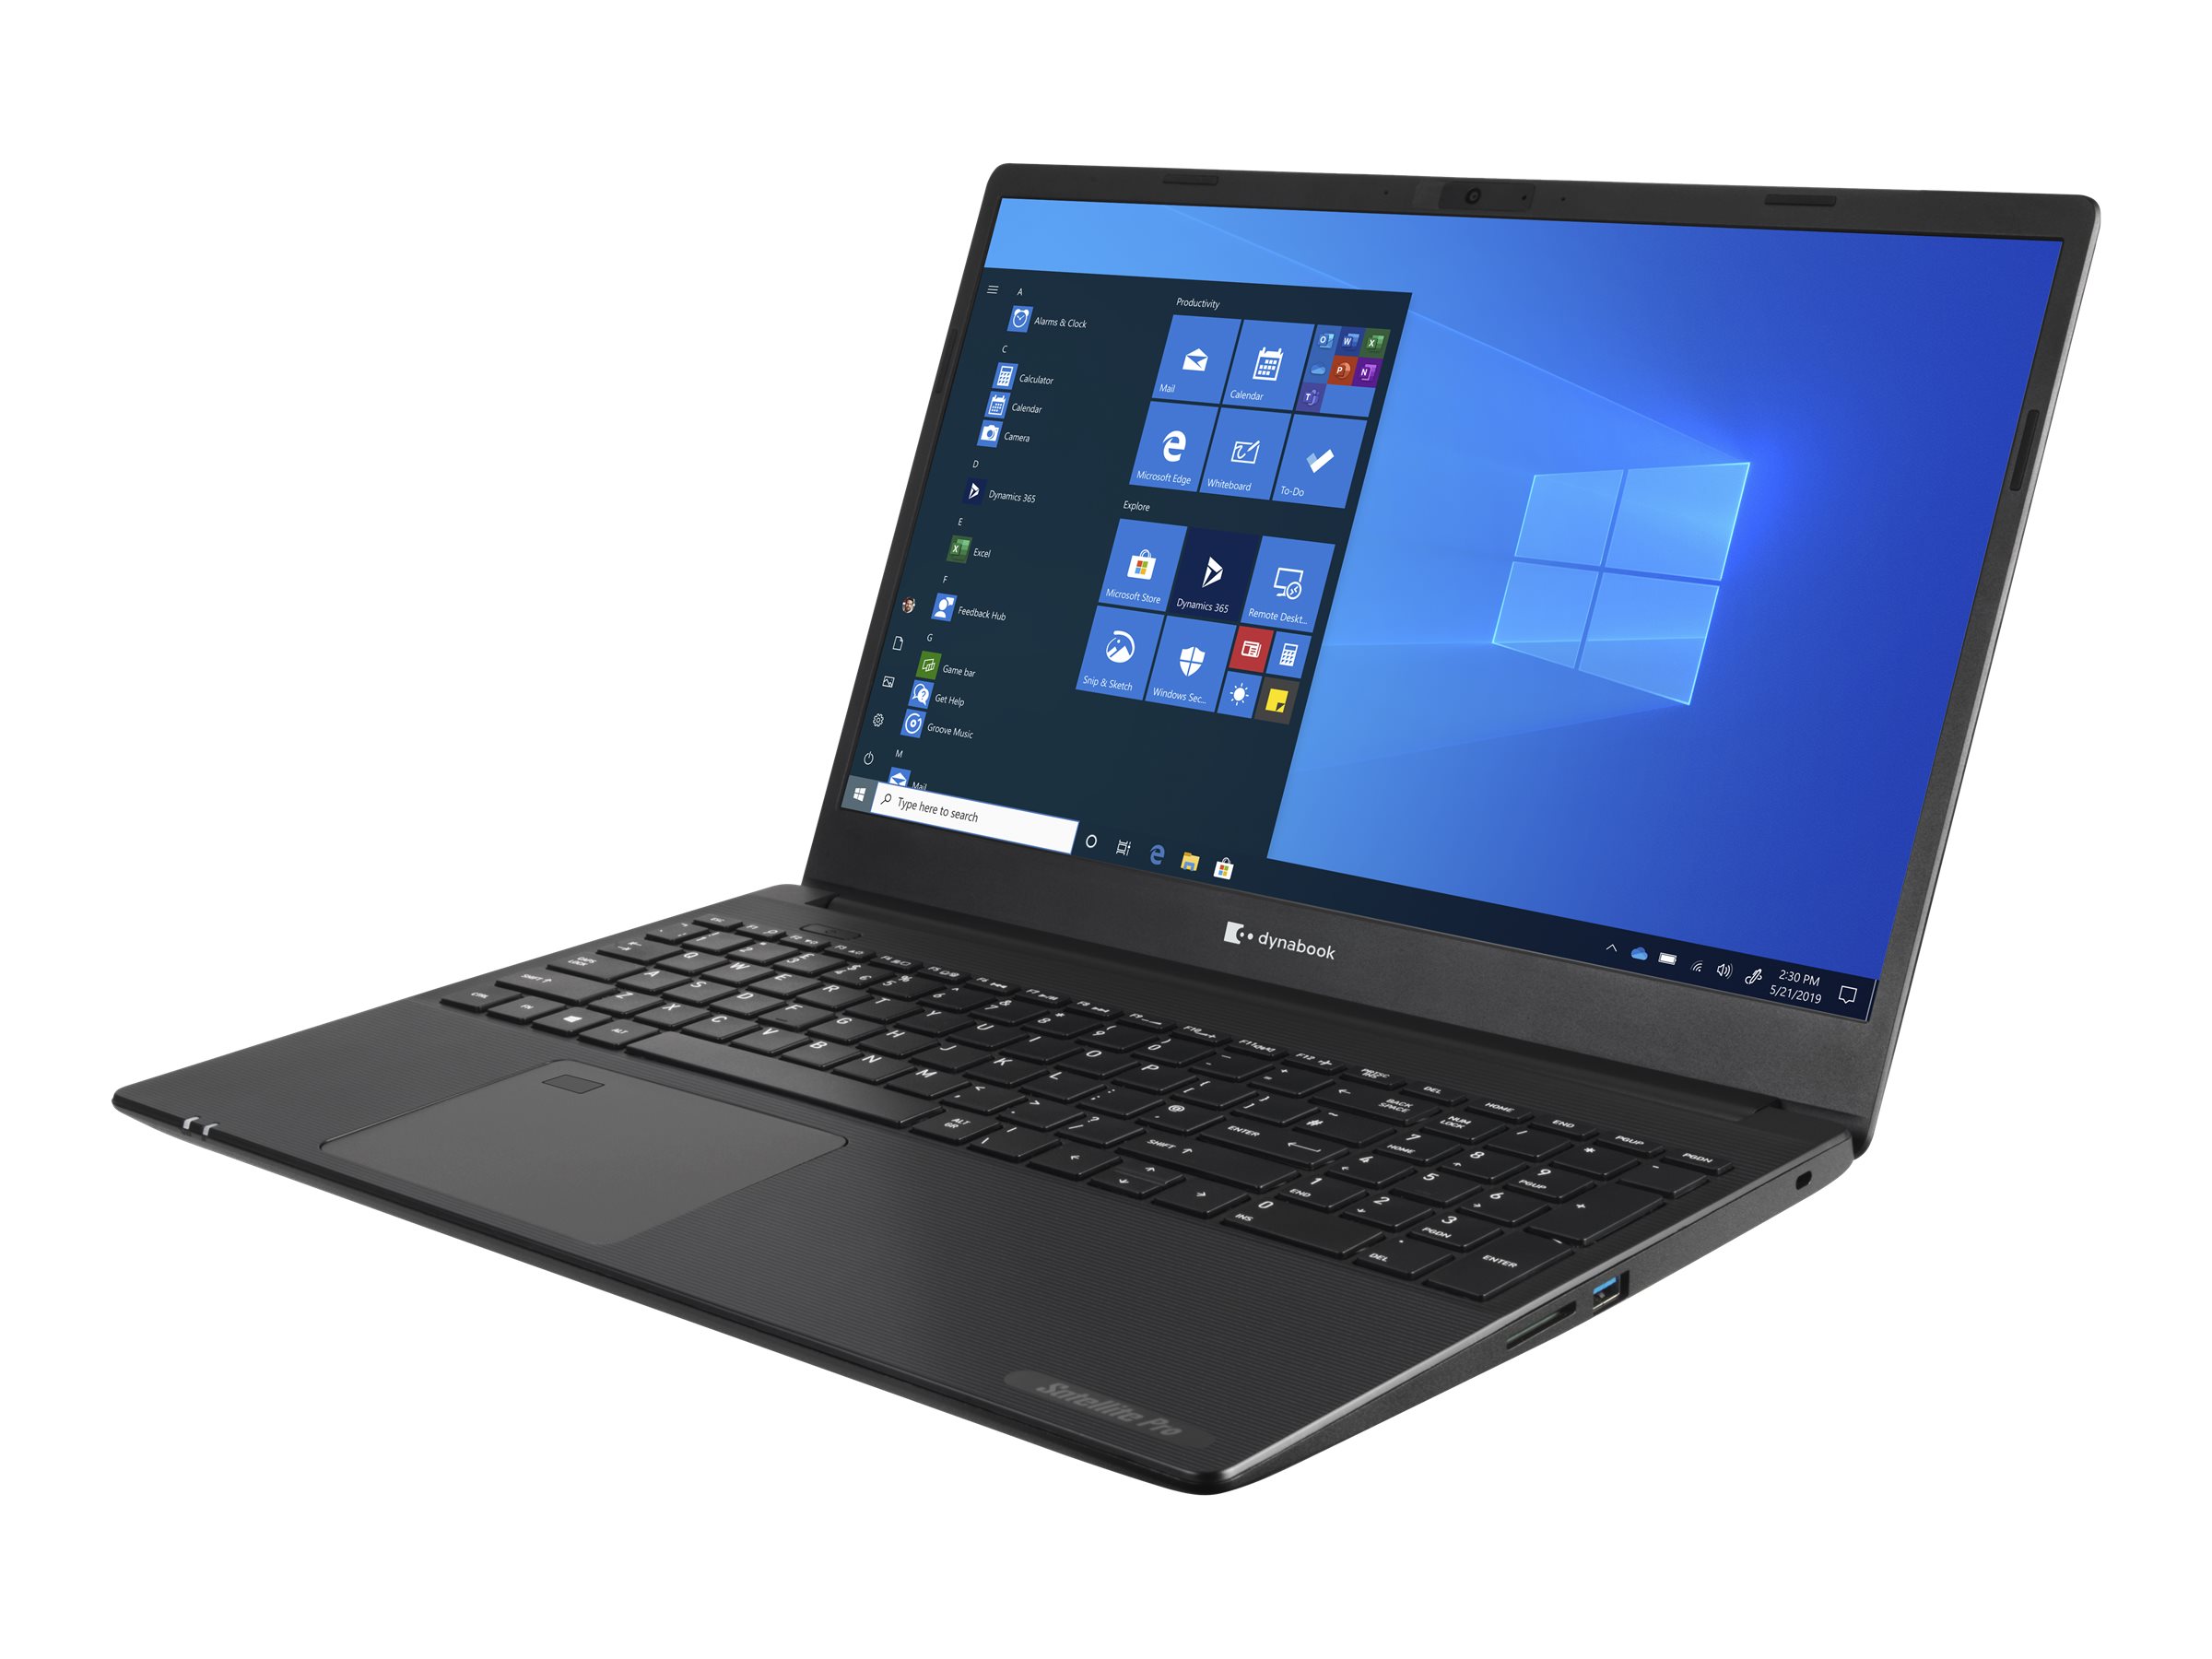 Dynabook Toshiba Satellite Pro L50 (G) - full specs, details and review